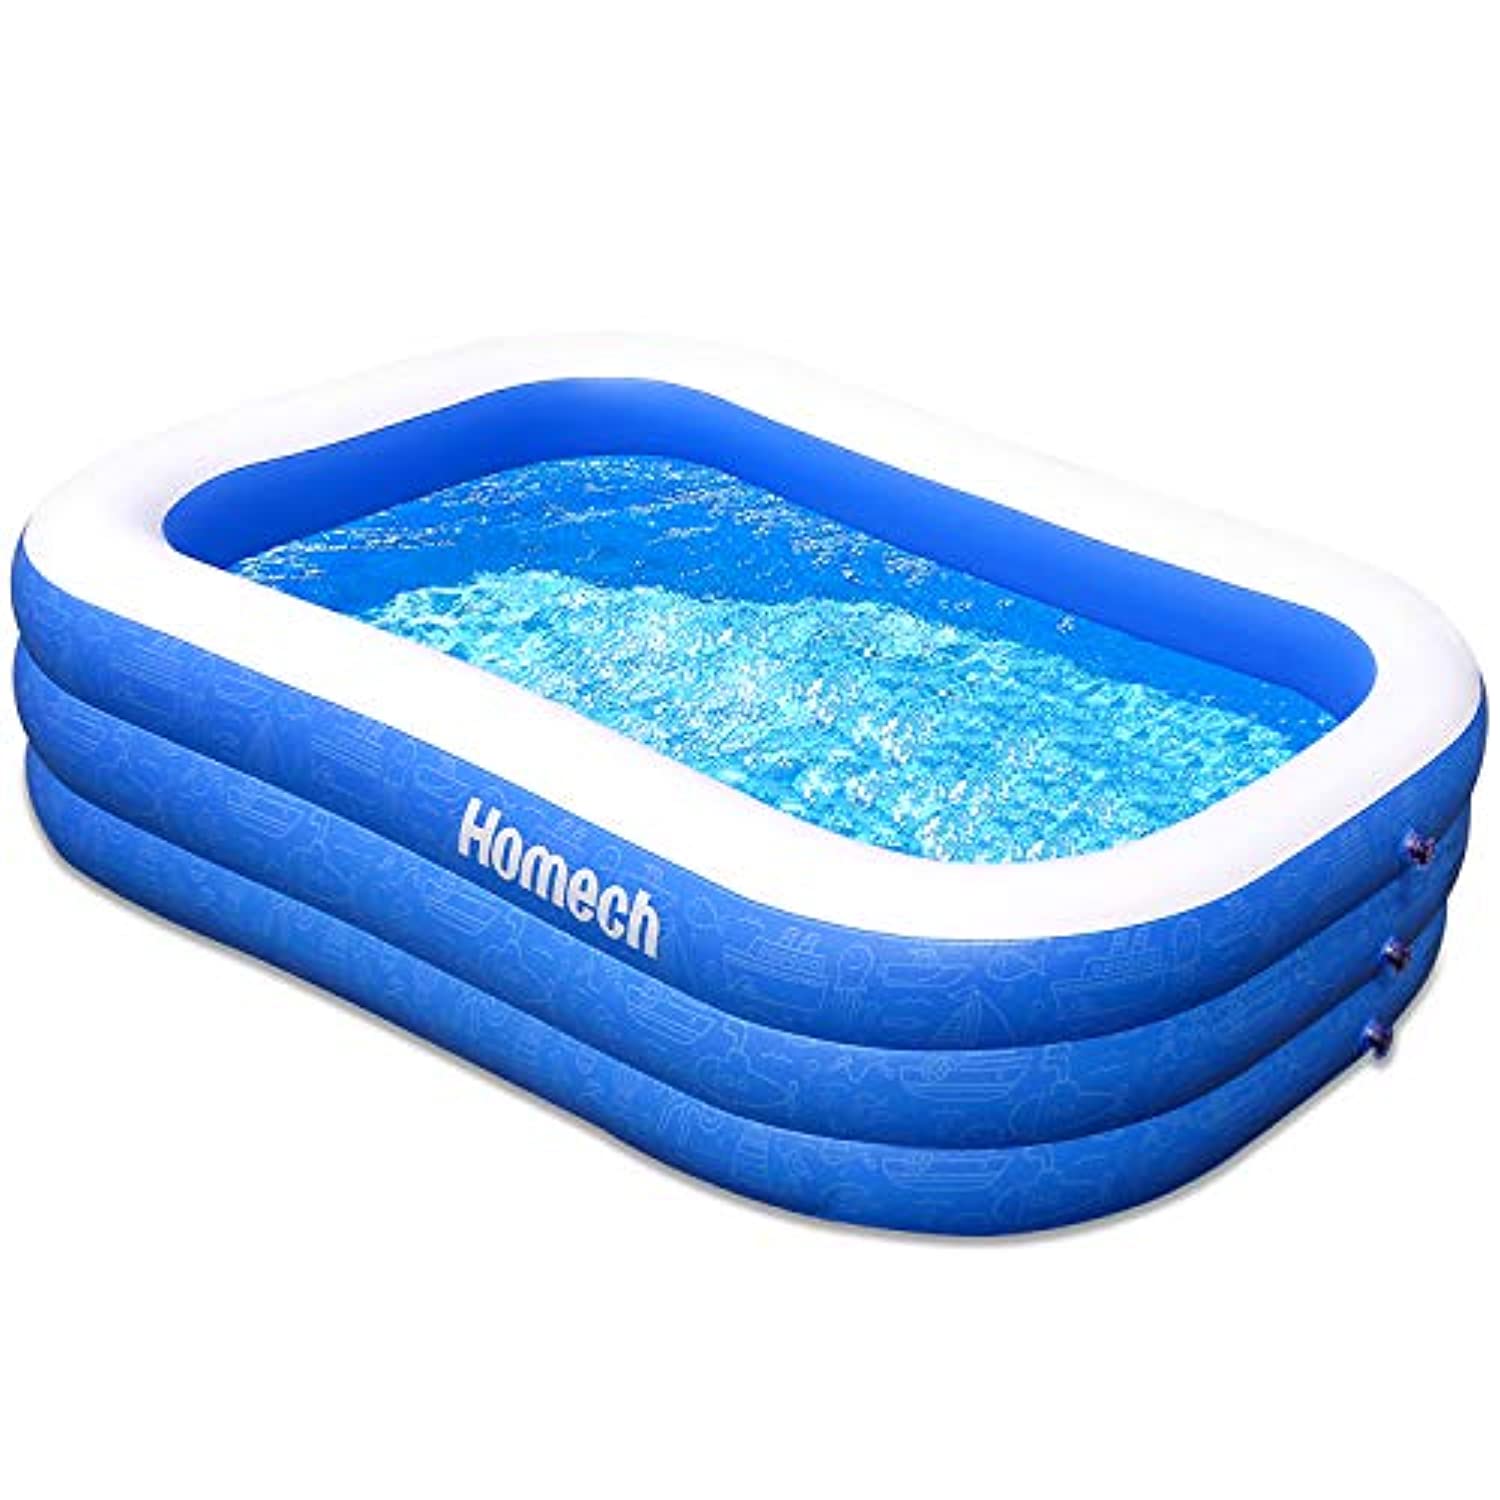 Blow up Kiddie Pool for Family D//71.5 Inflatable Swimming Pool Inflatable Lounge Pool for Kids,Baby,Adult,Inflatable Water Ball Pool for Outdoor,Garden,Backyard Summer Water Party